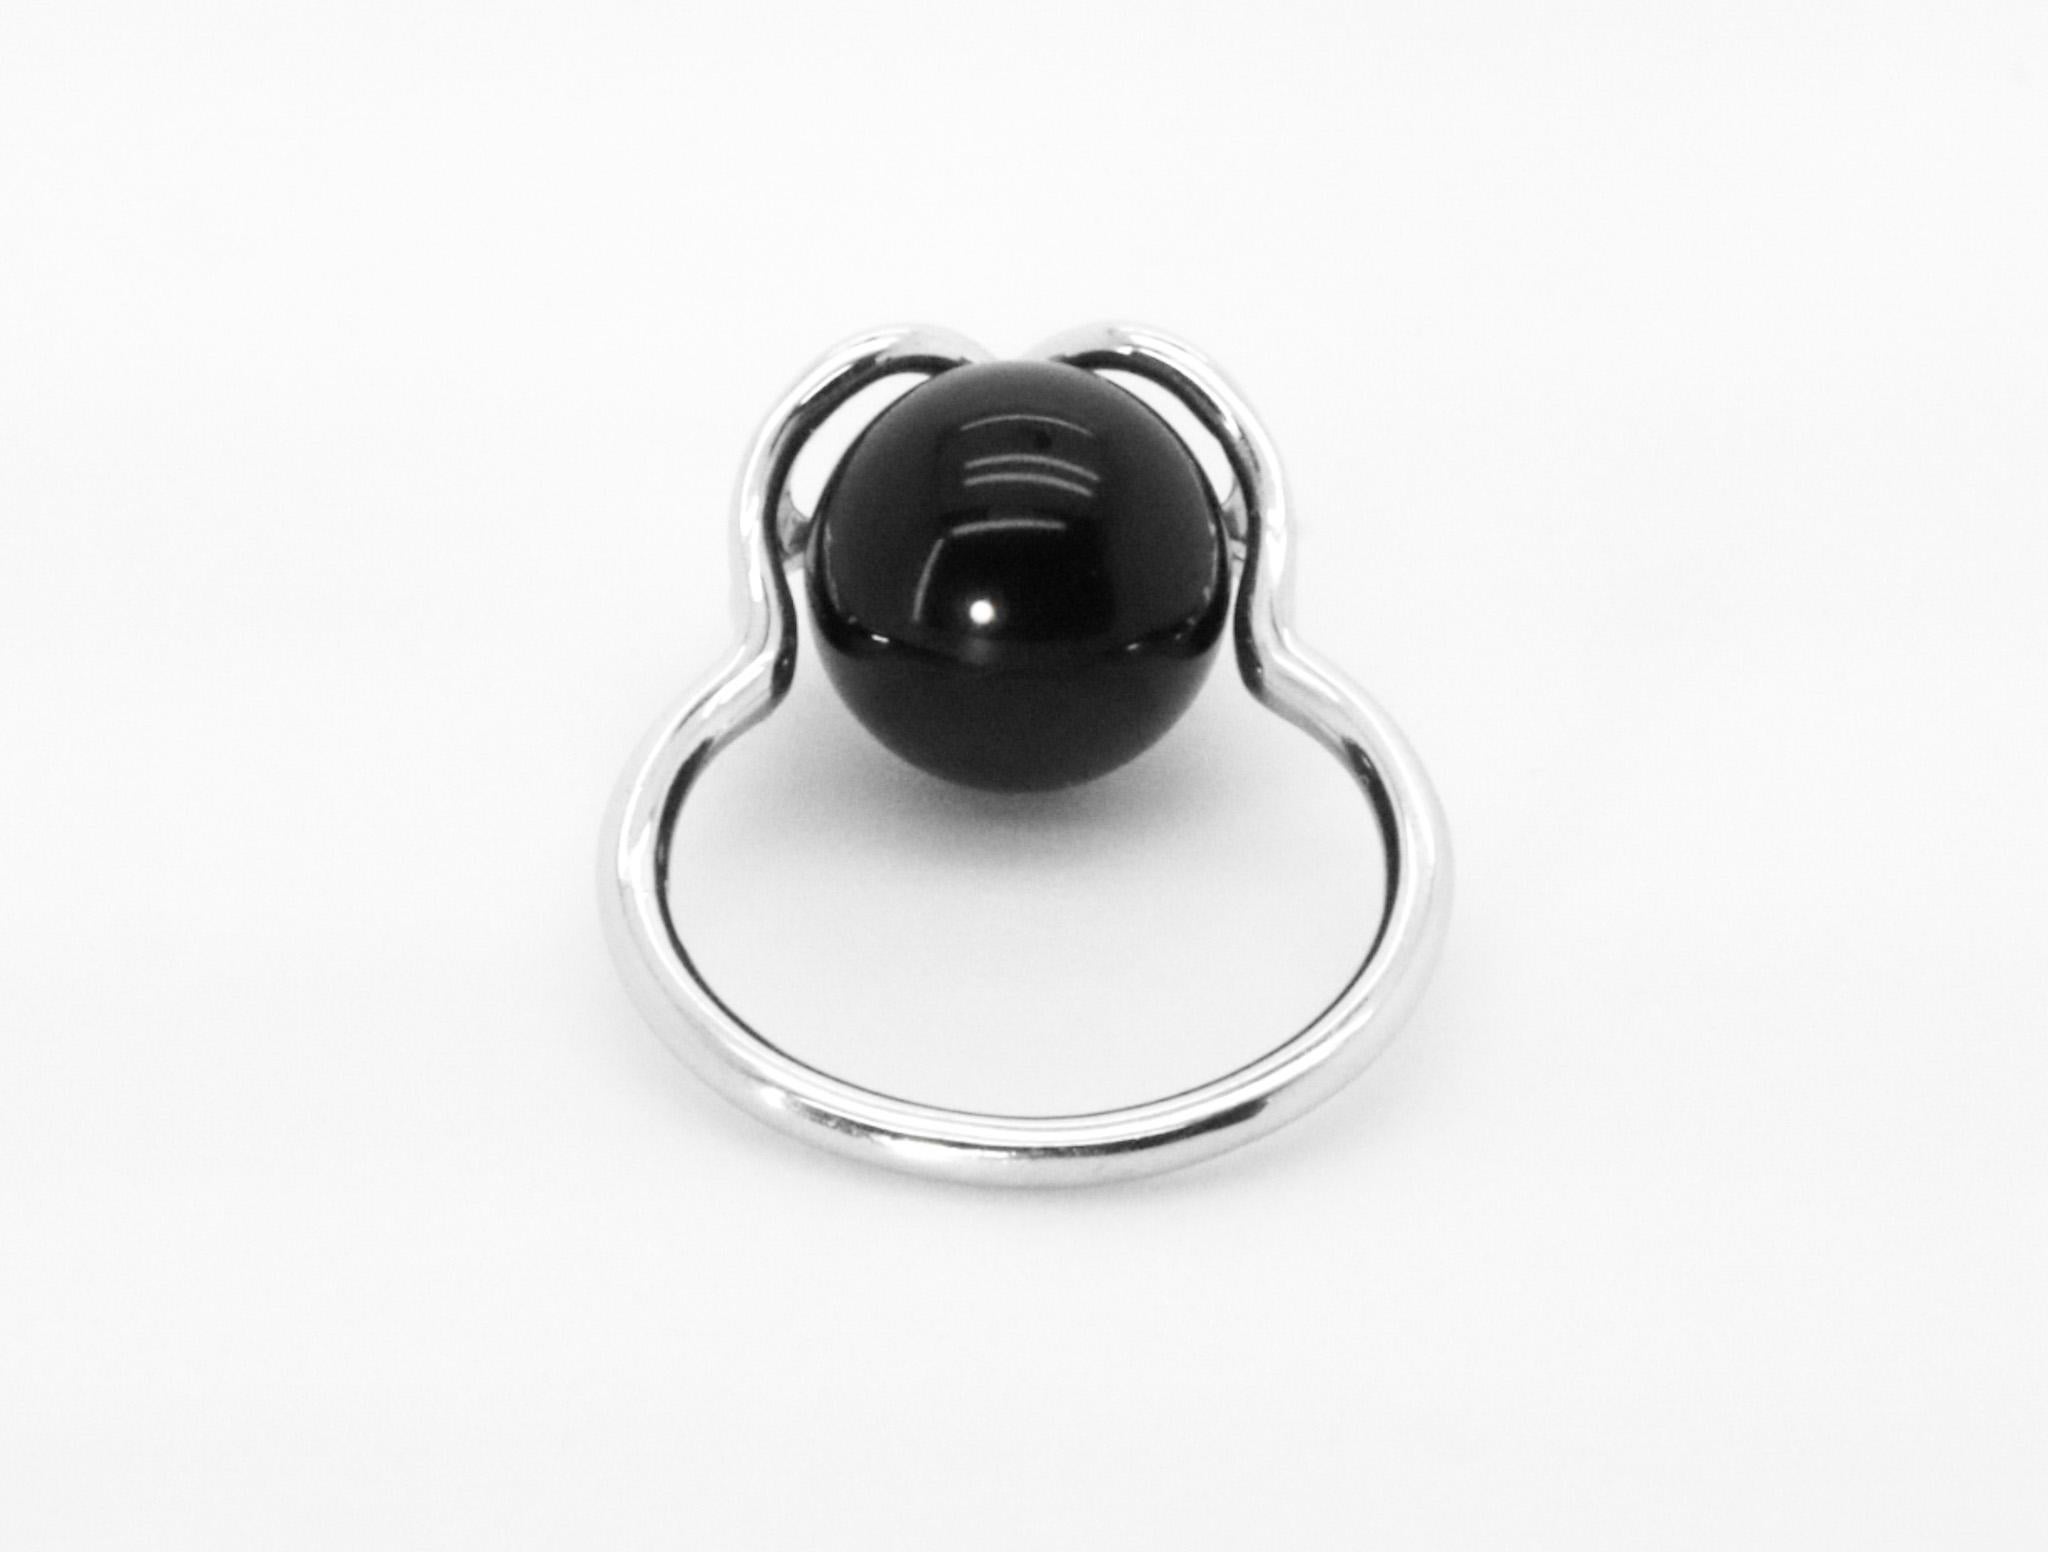 Ball Cut 18K White Gold Infinity Symbol Interchangeable Gems Onyx  Cocktail Ring. For Sale